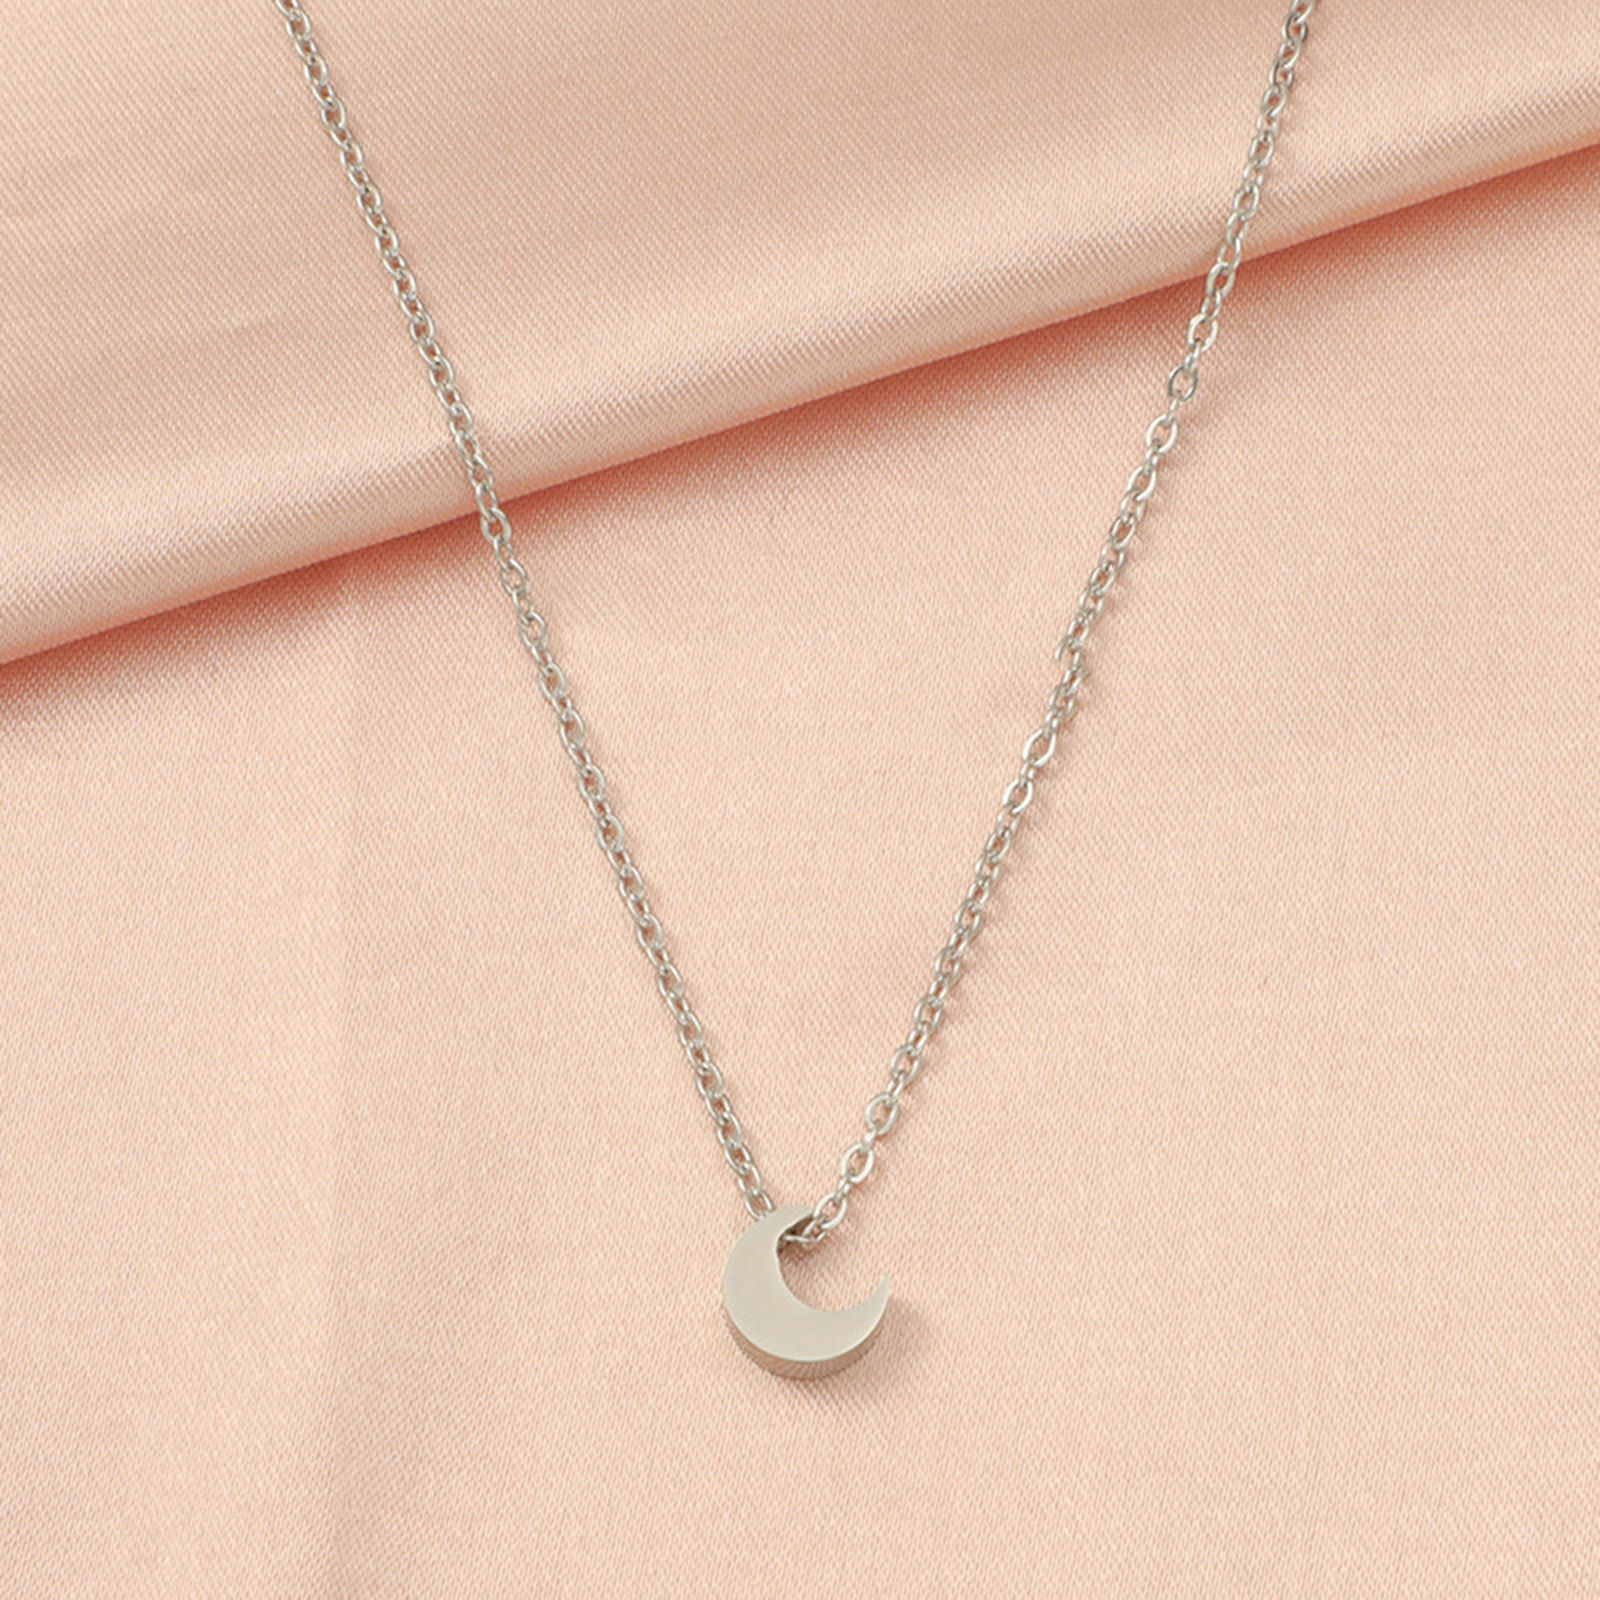 Picture of Eco-friendly 304 Stainless Steel Galaxy Link Cable Chain Necklace Silver Tone Half Moon 45cm(17 6/8") long, 1 Piece